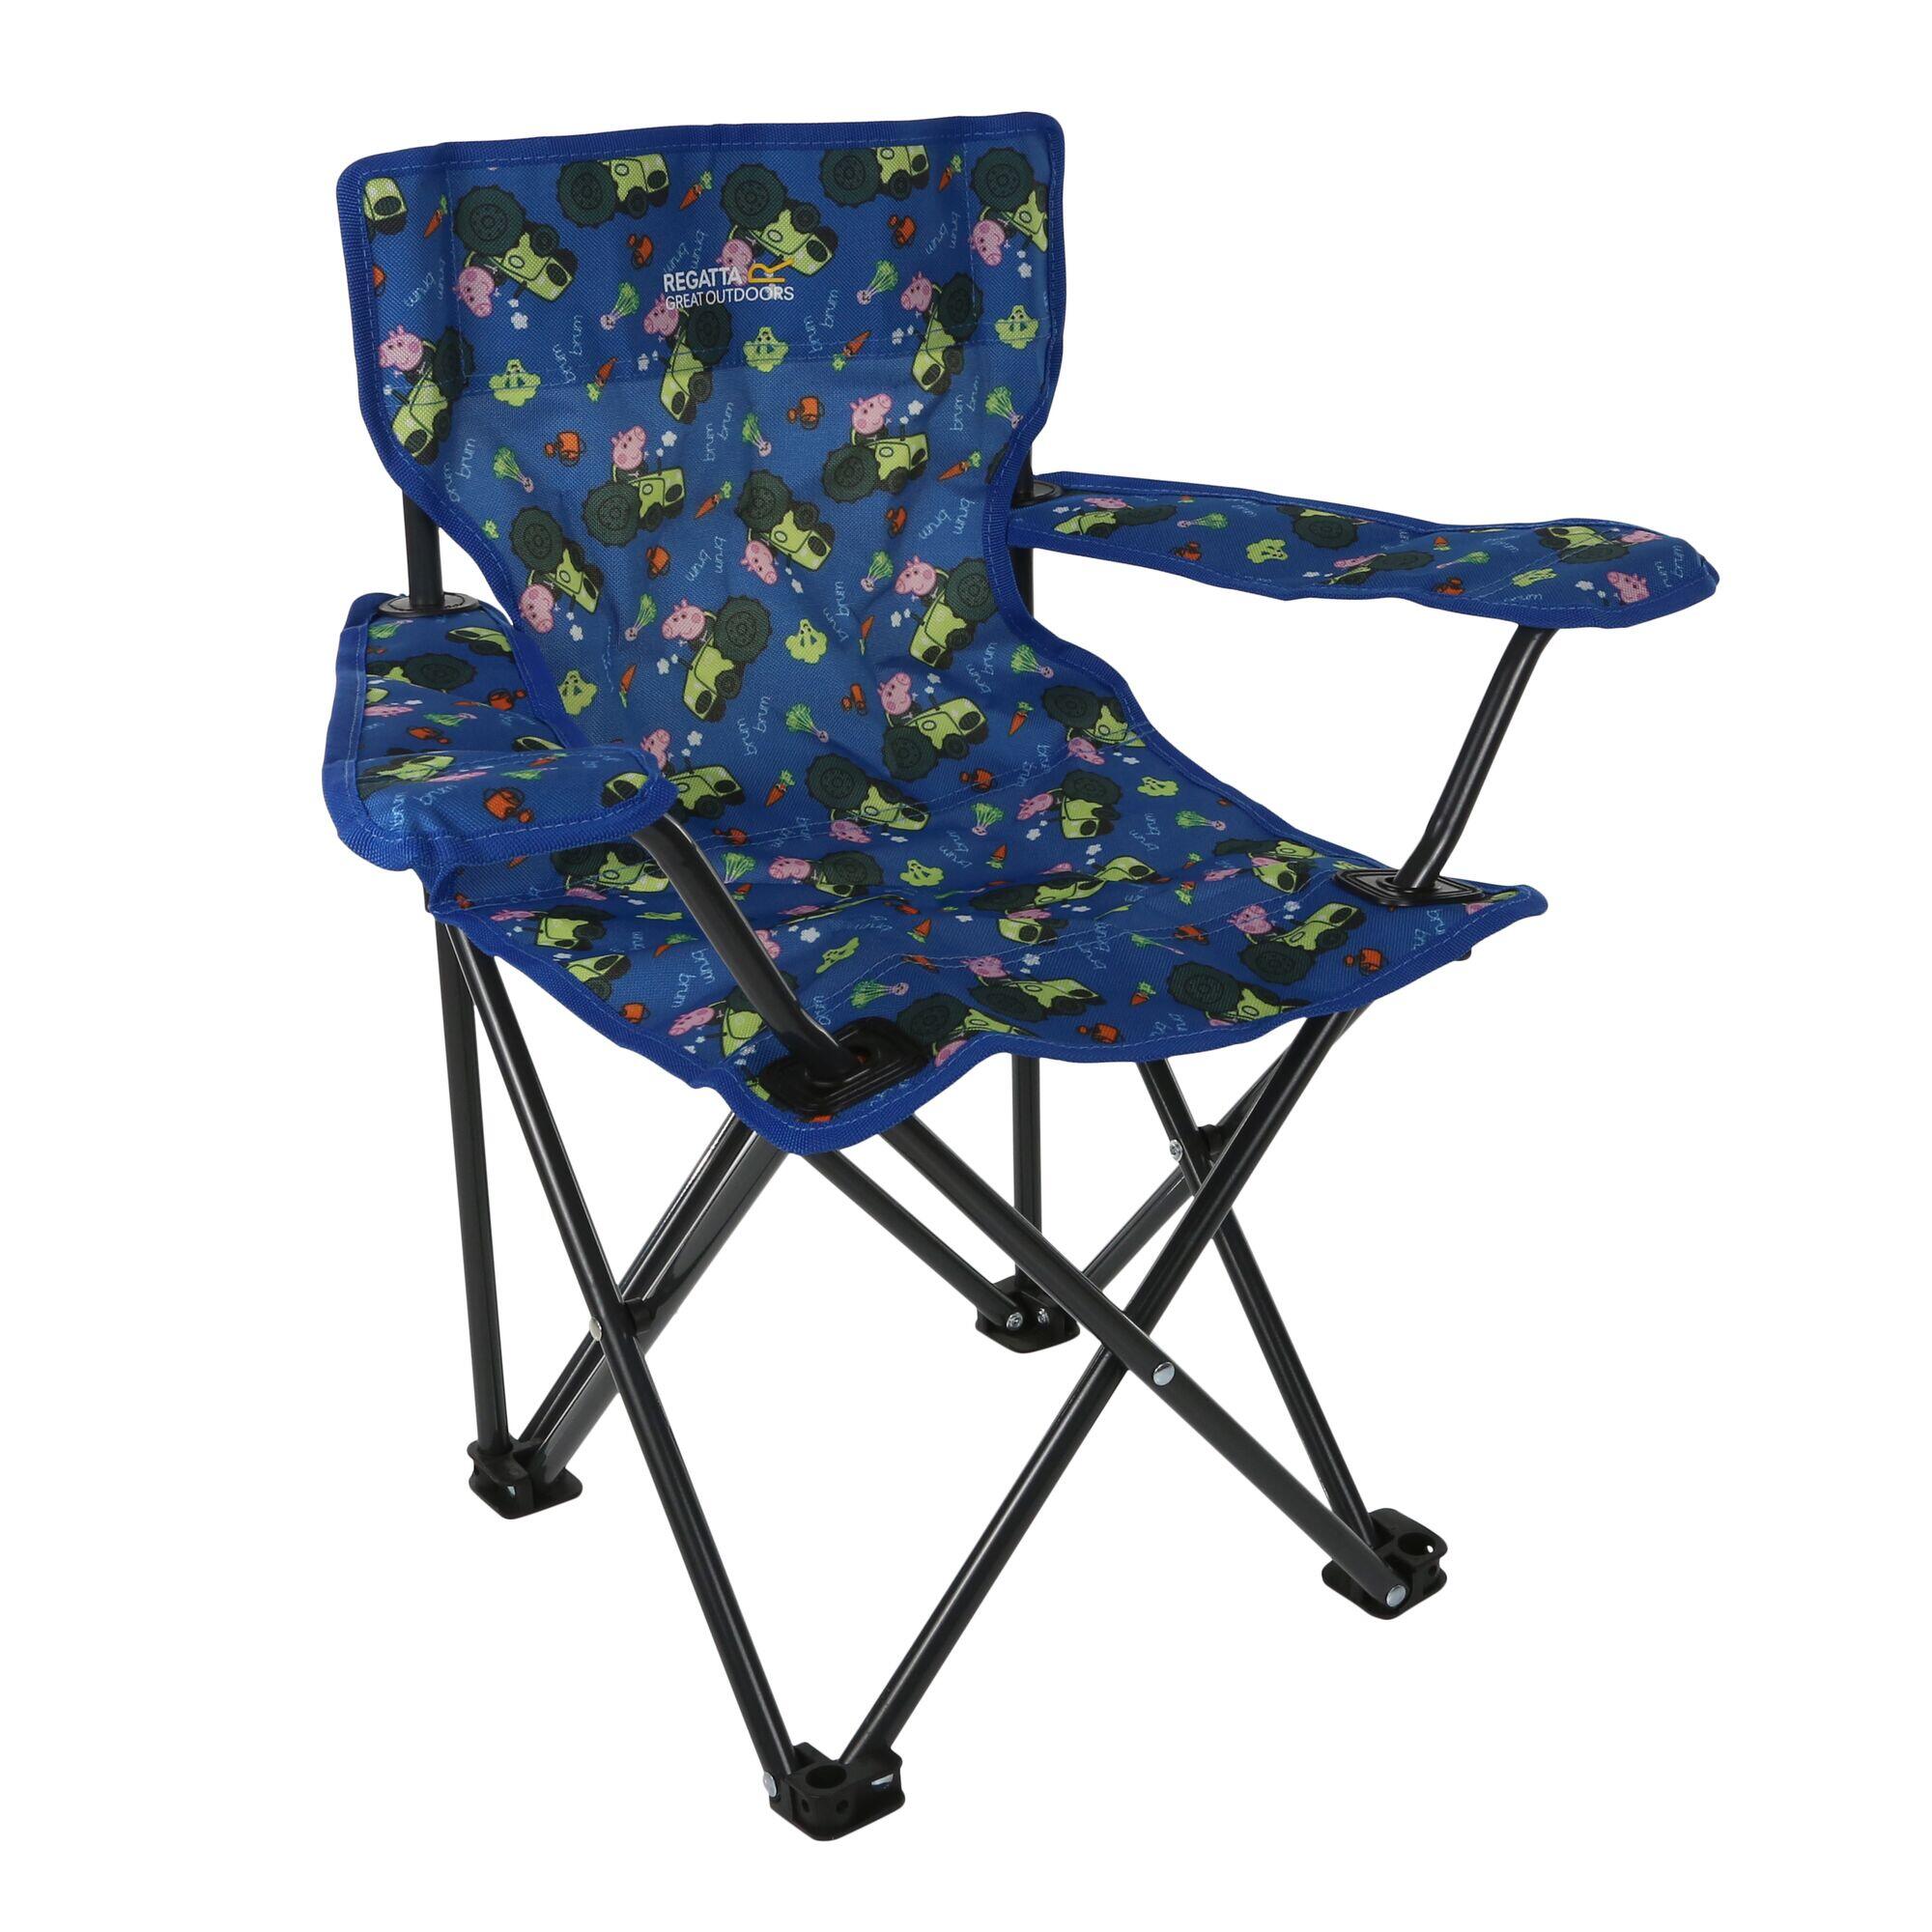 Peppa Pig Kids' Camping Chair - Blue Tractor 4/5